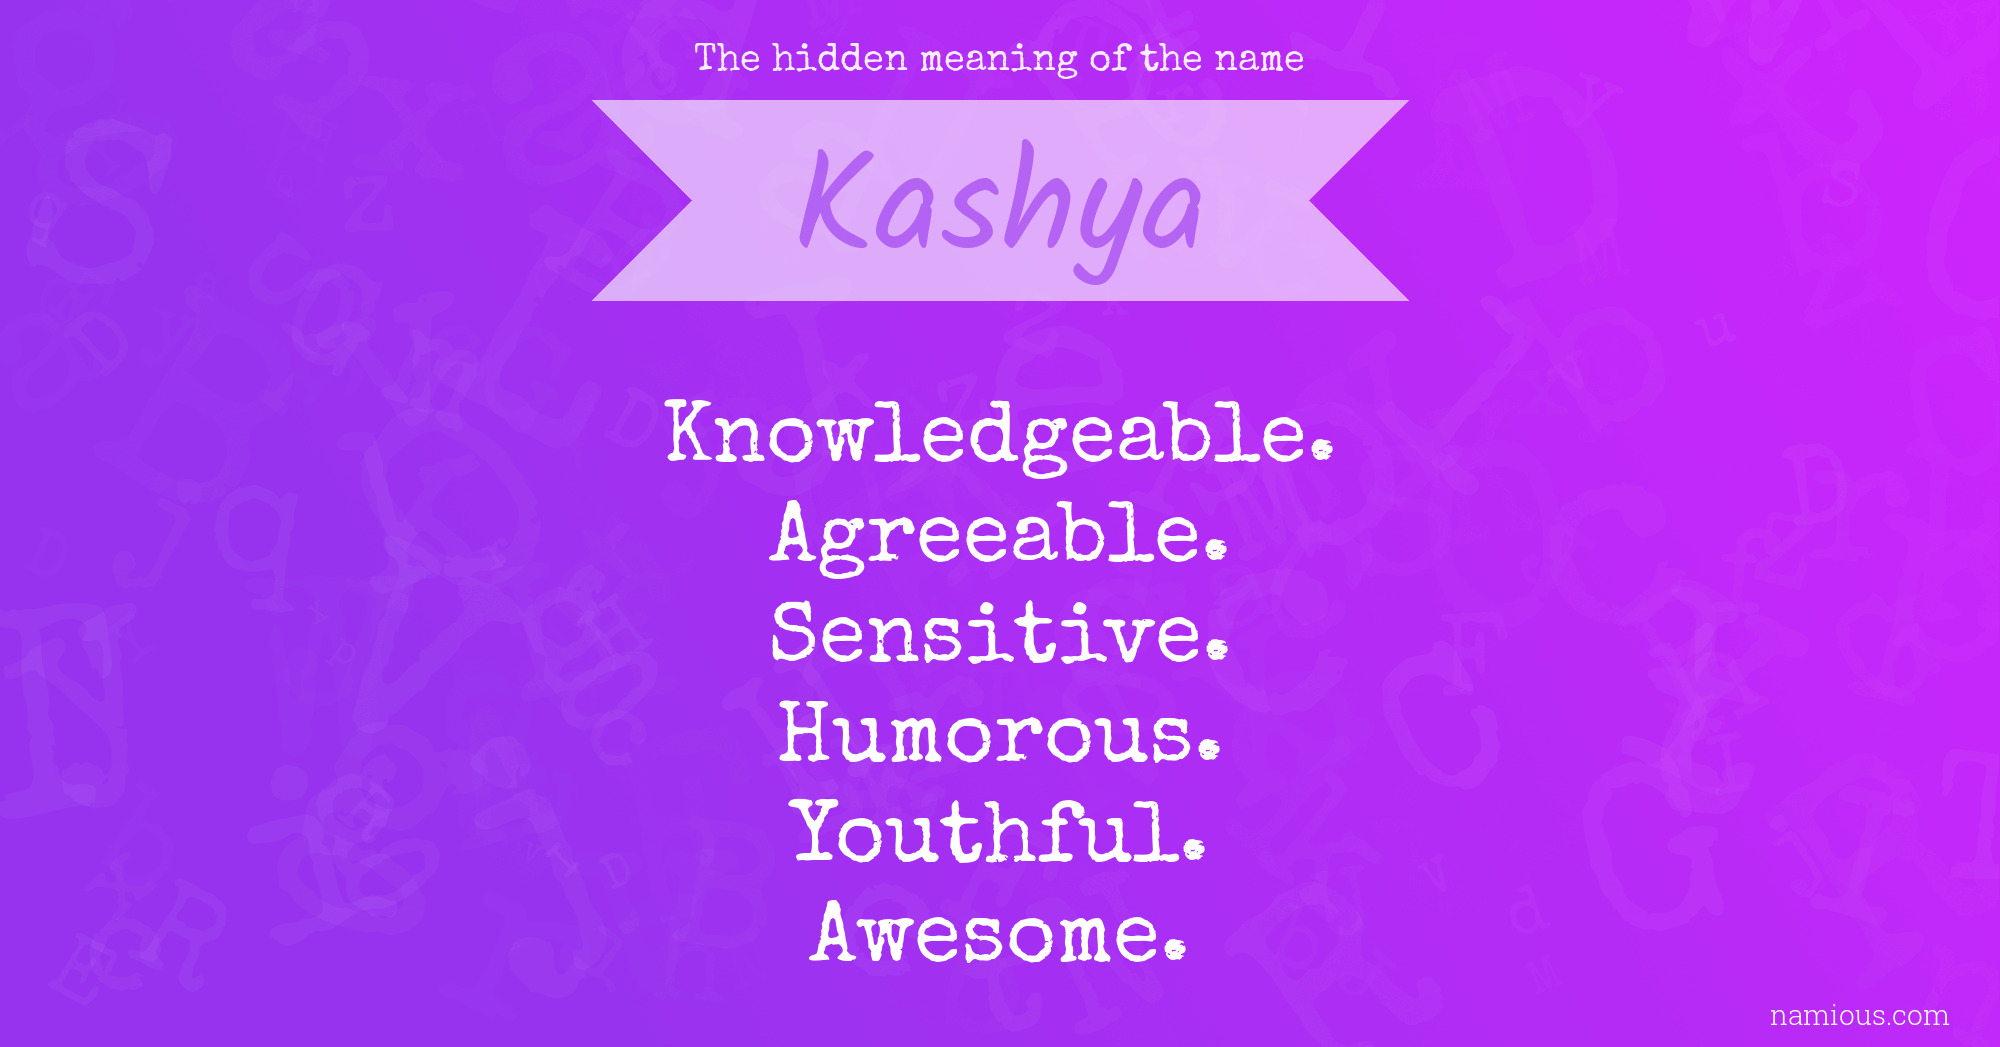 The hidden meaning of the name Kashya